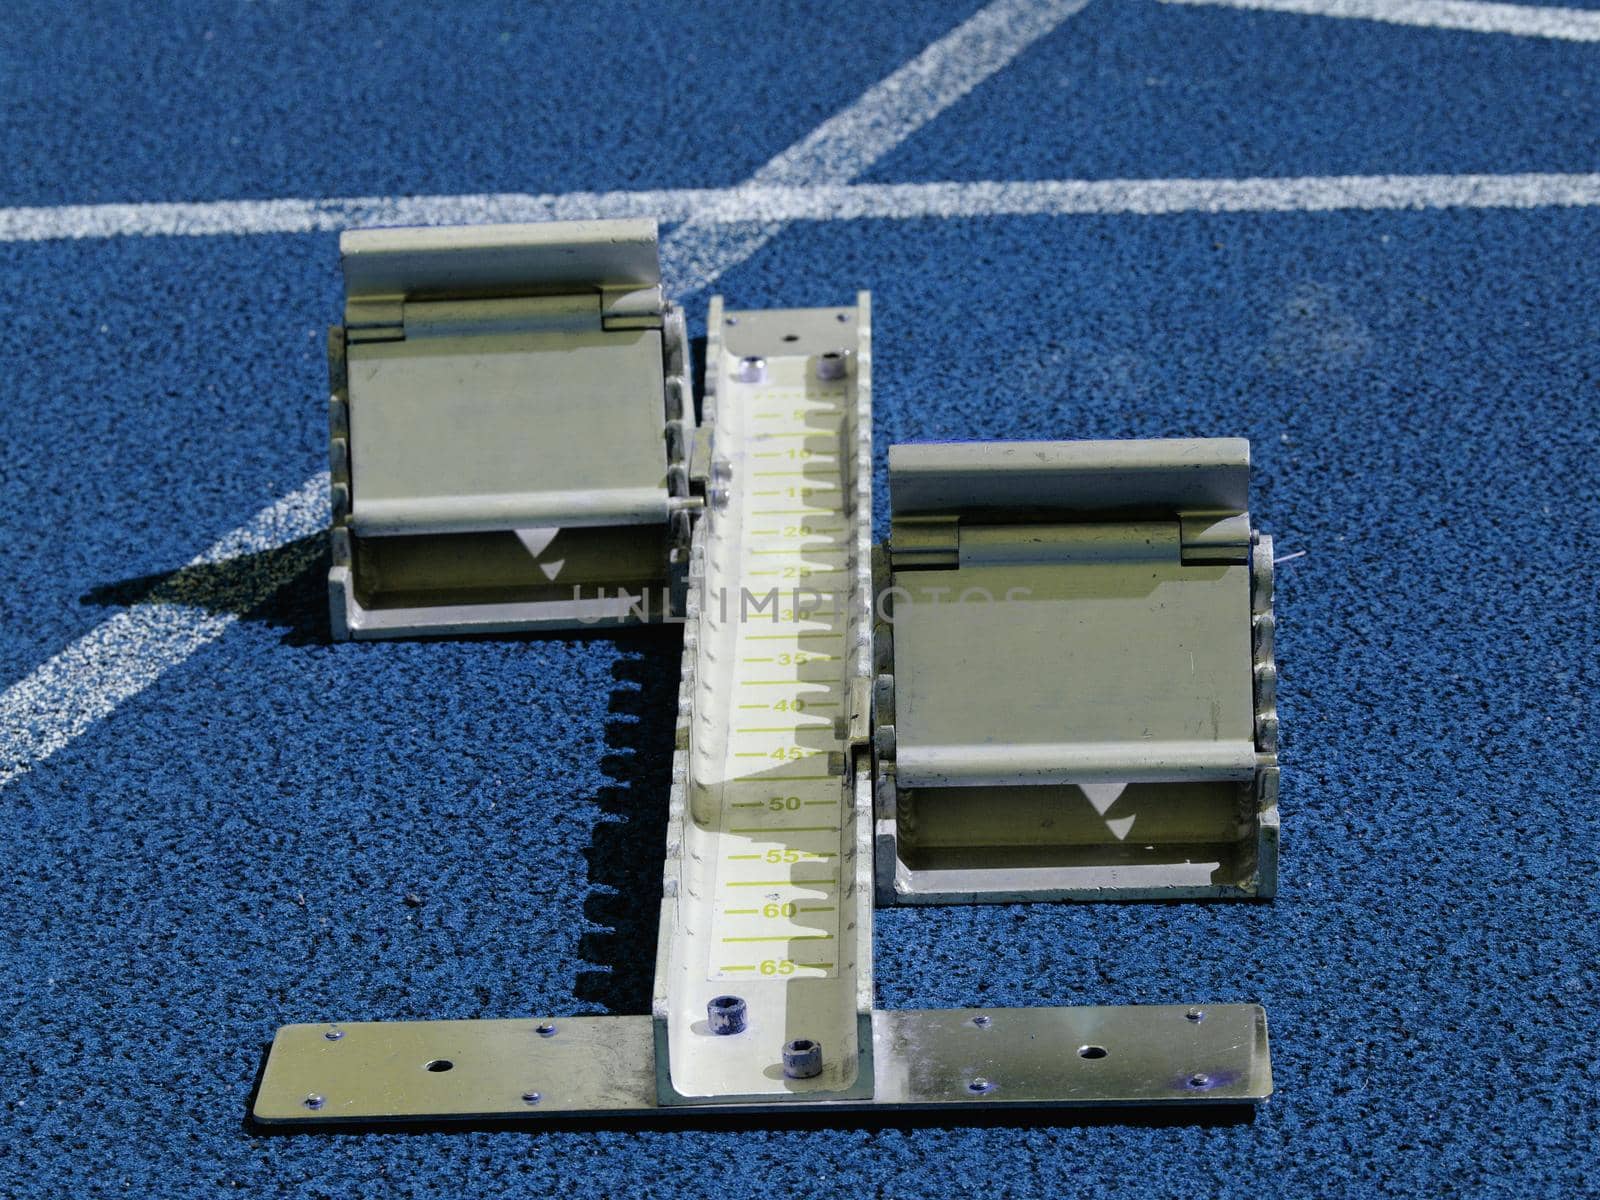 Set of starting block ready for sprint start on athletic stadium. Blue color filter